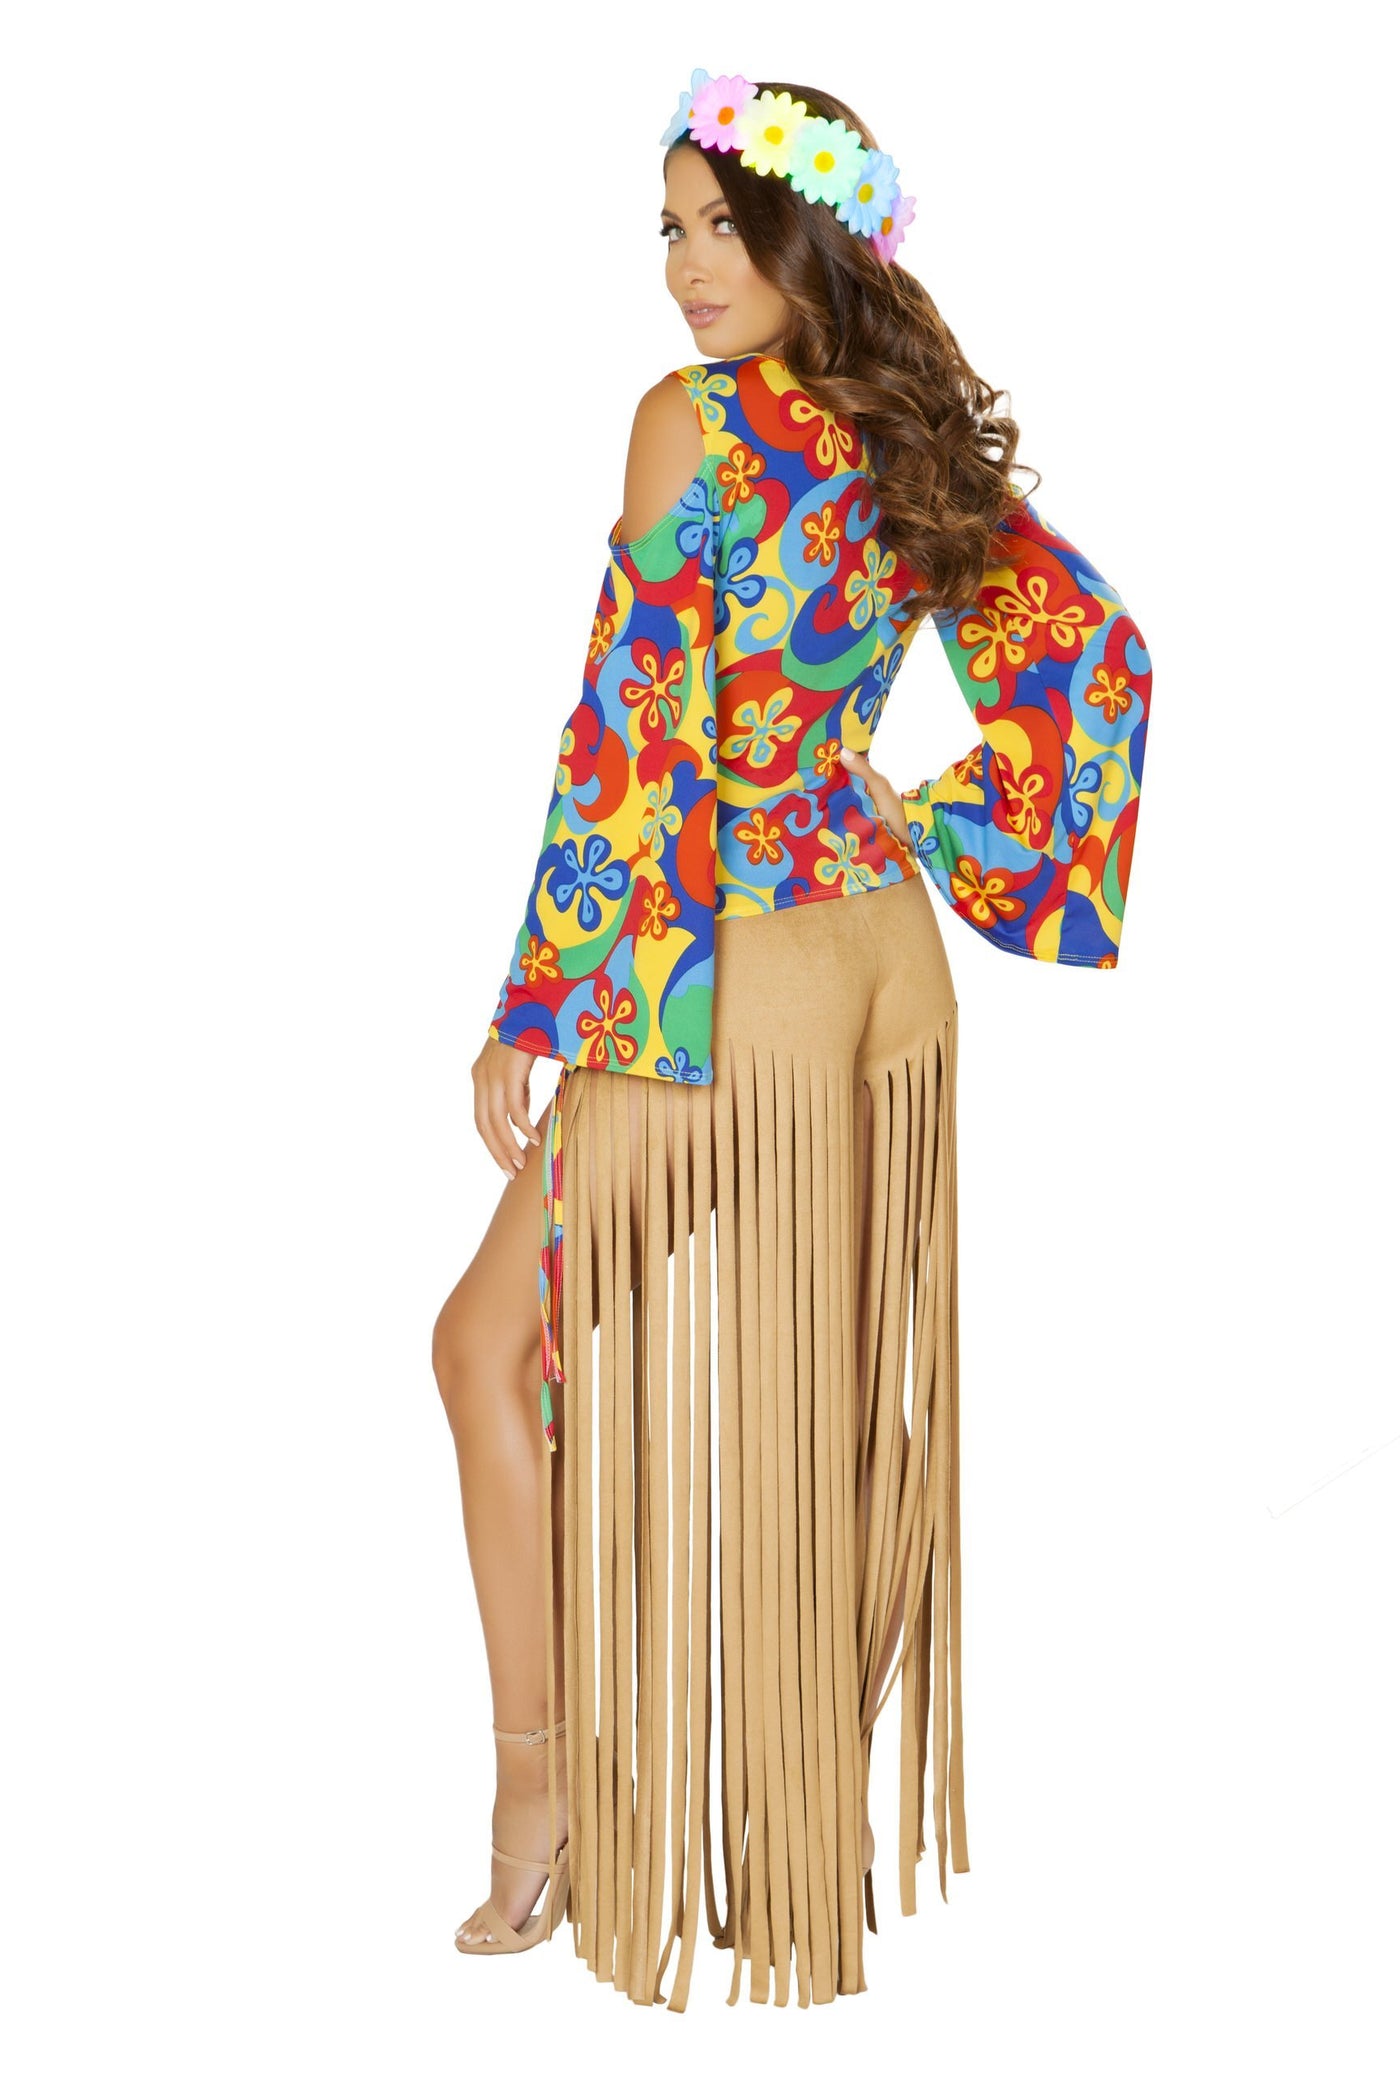 Buy 2pc Hippie Princess from RomaRetailShop for 69.99 with Same Day Shipping Designed by Roma Costume 4881-AS-S